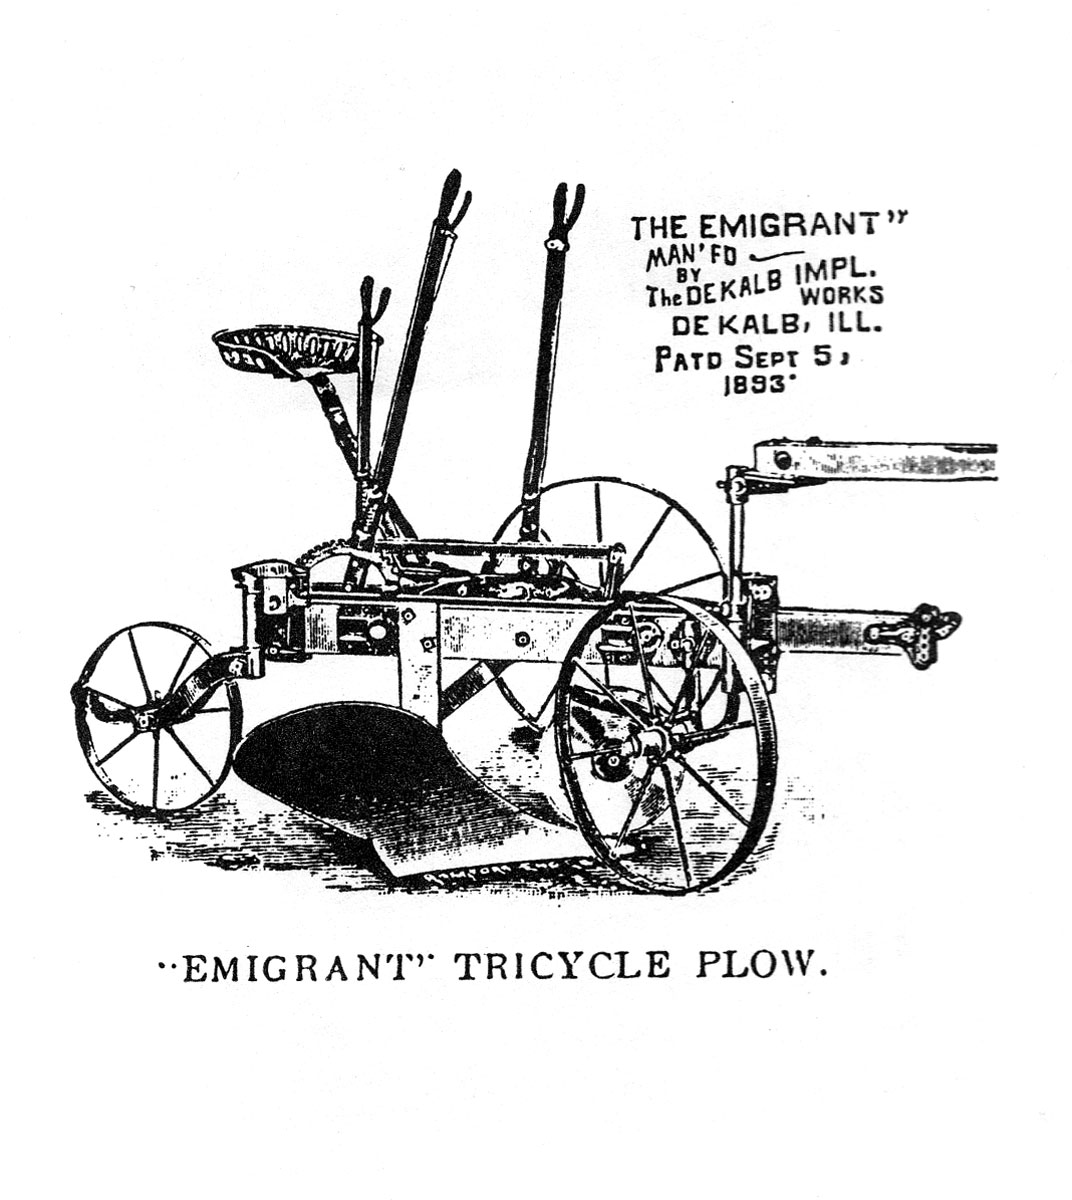 The plow that inspired the name for the sculpture.